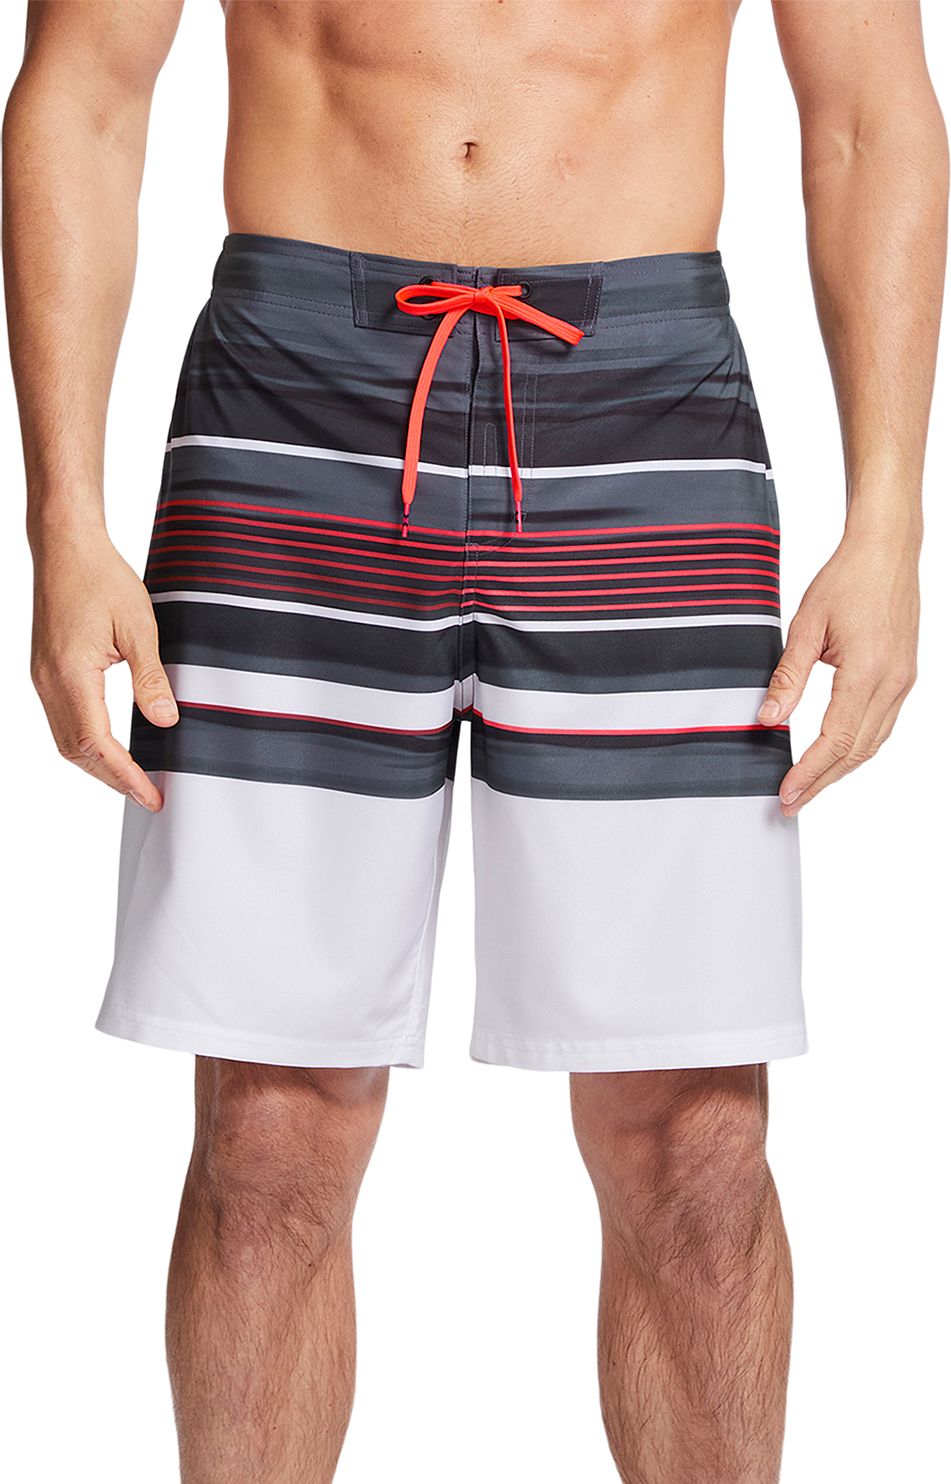 Under Armour Mens Serenity View E-Board Shorts